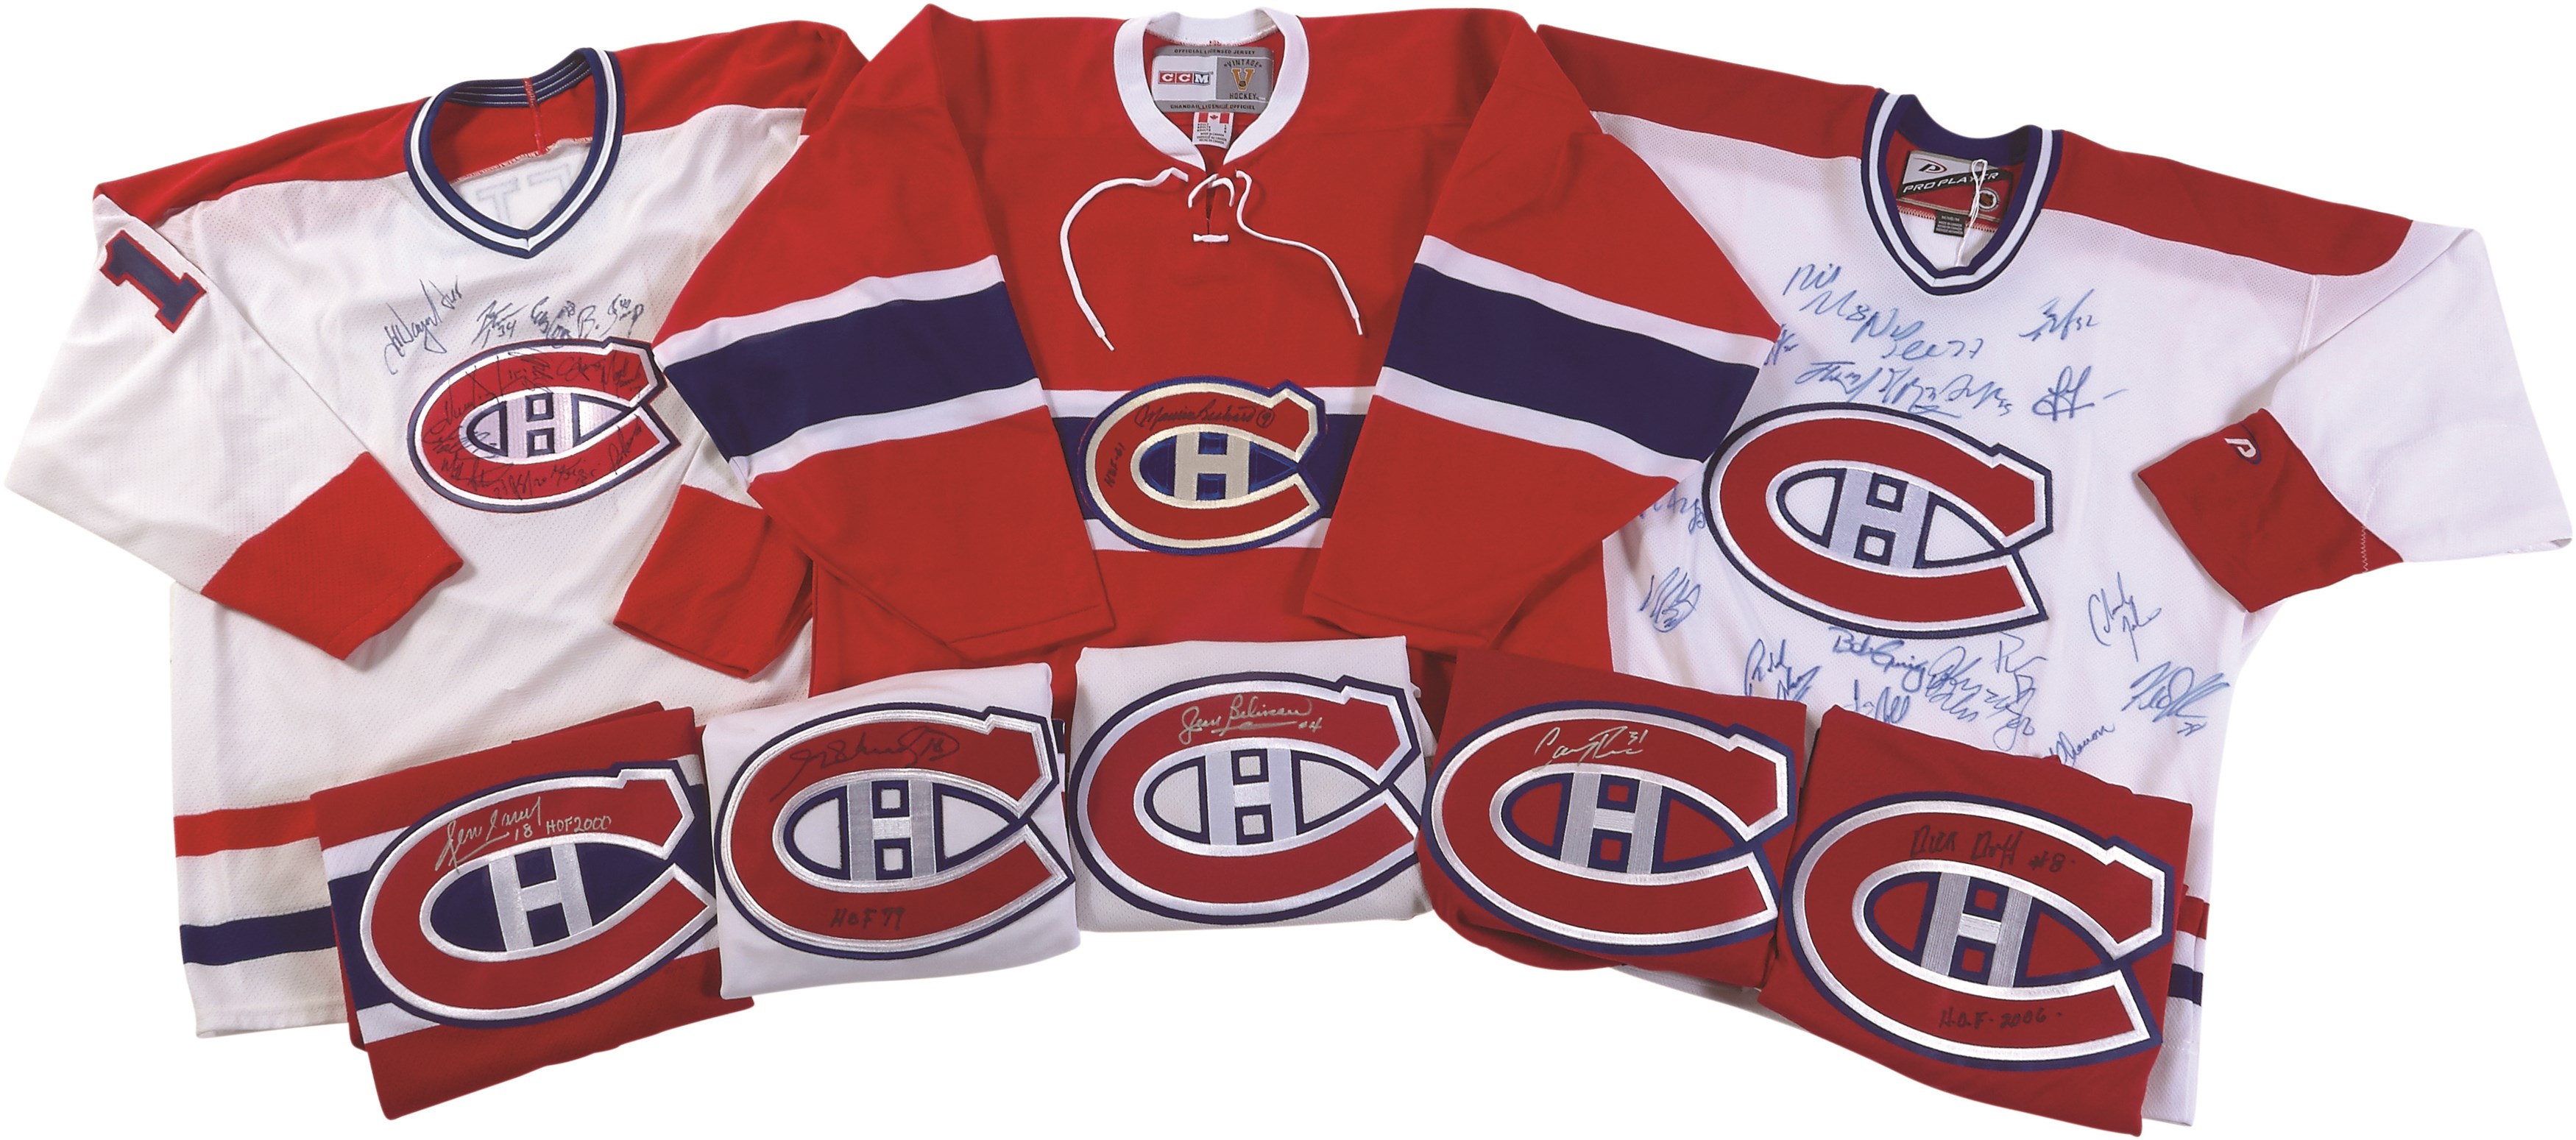 - Montreal Canadiens Signed Jersey Collection w/Beliveau & Richard (18)